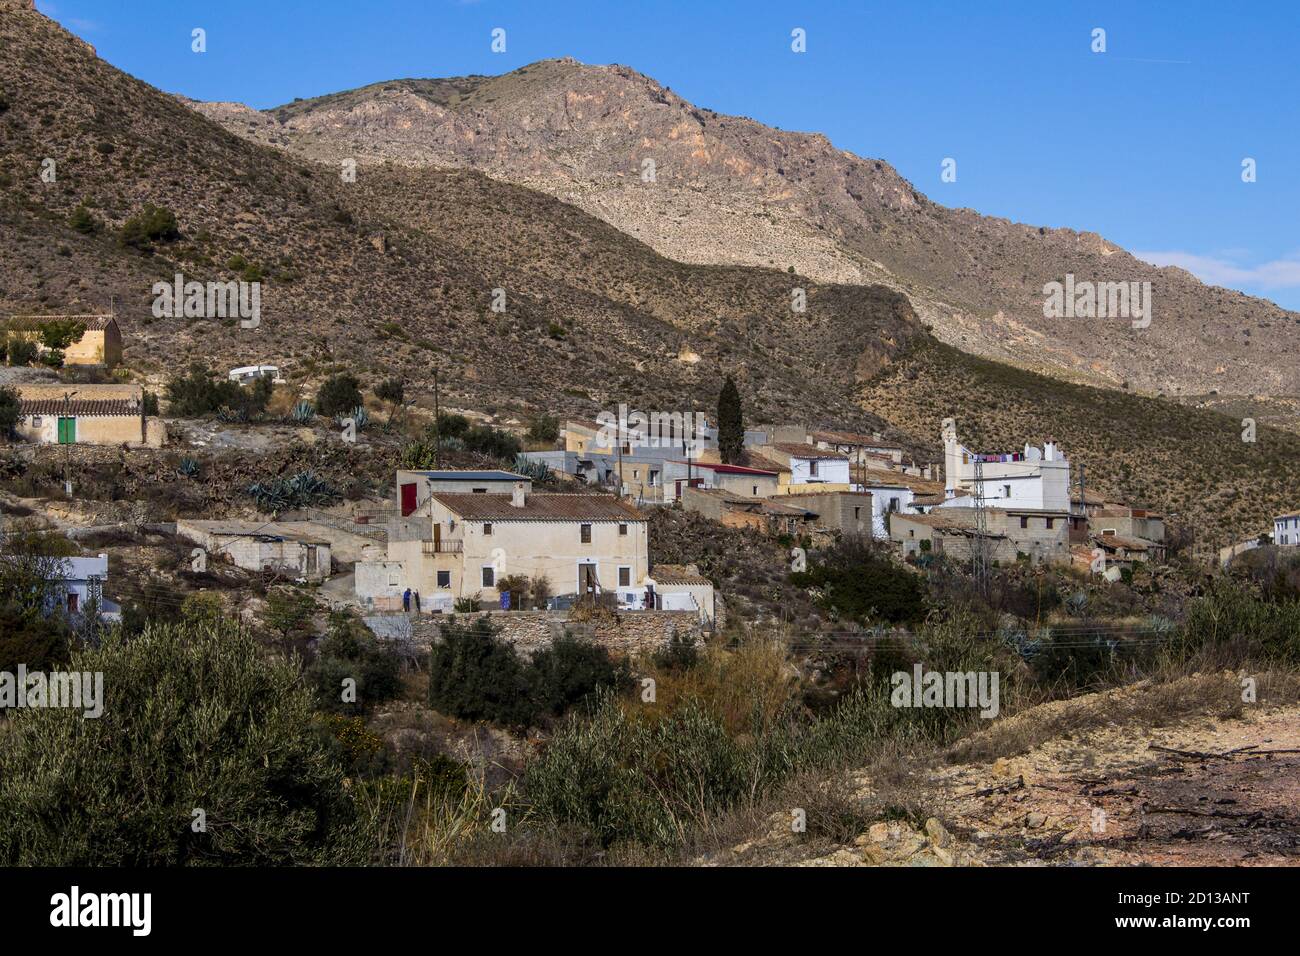 Small Traditional Spanish Mountain Village in Almeria province Andalucía Spain Stock Photo